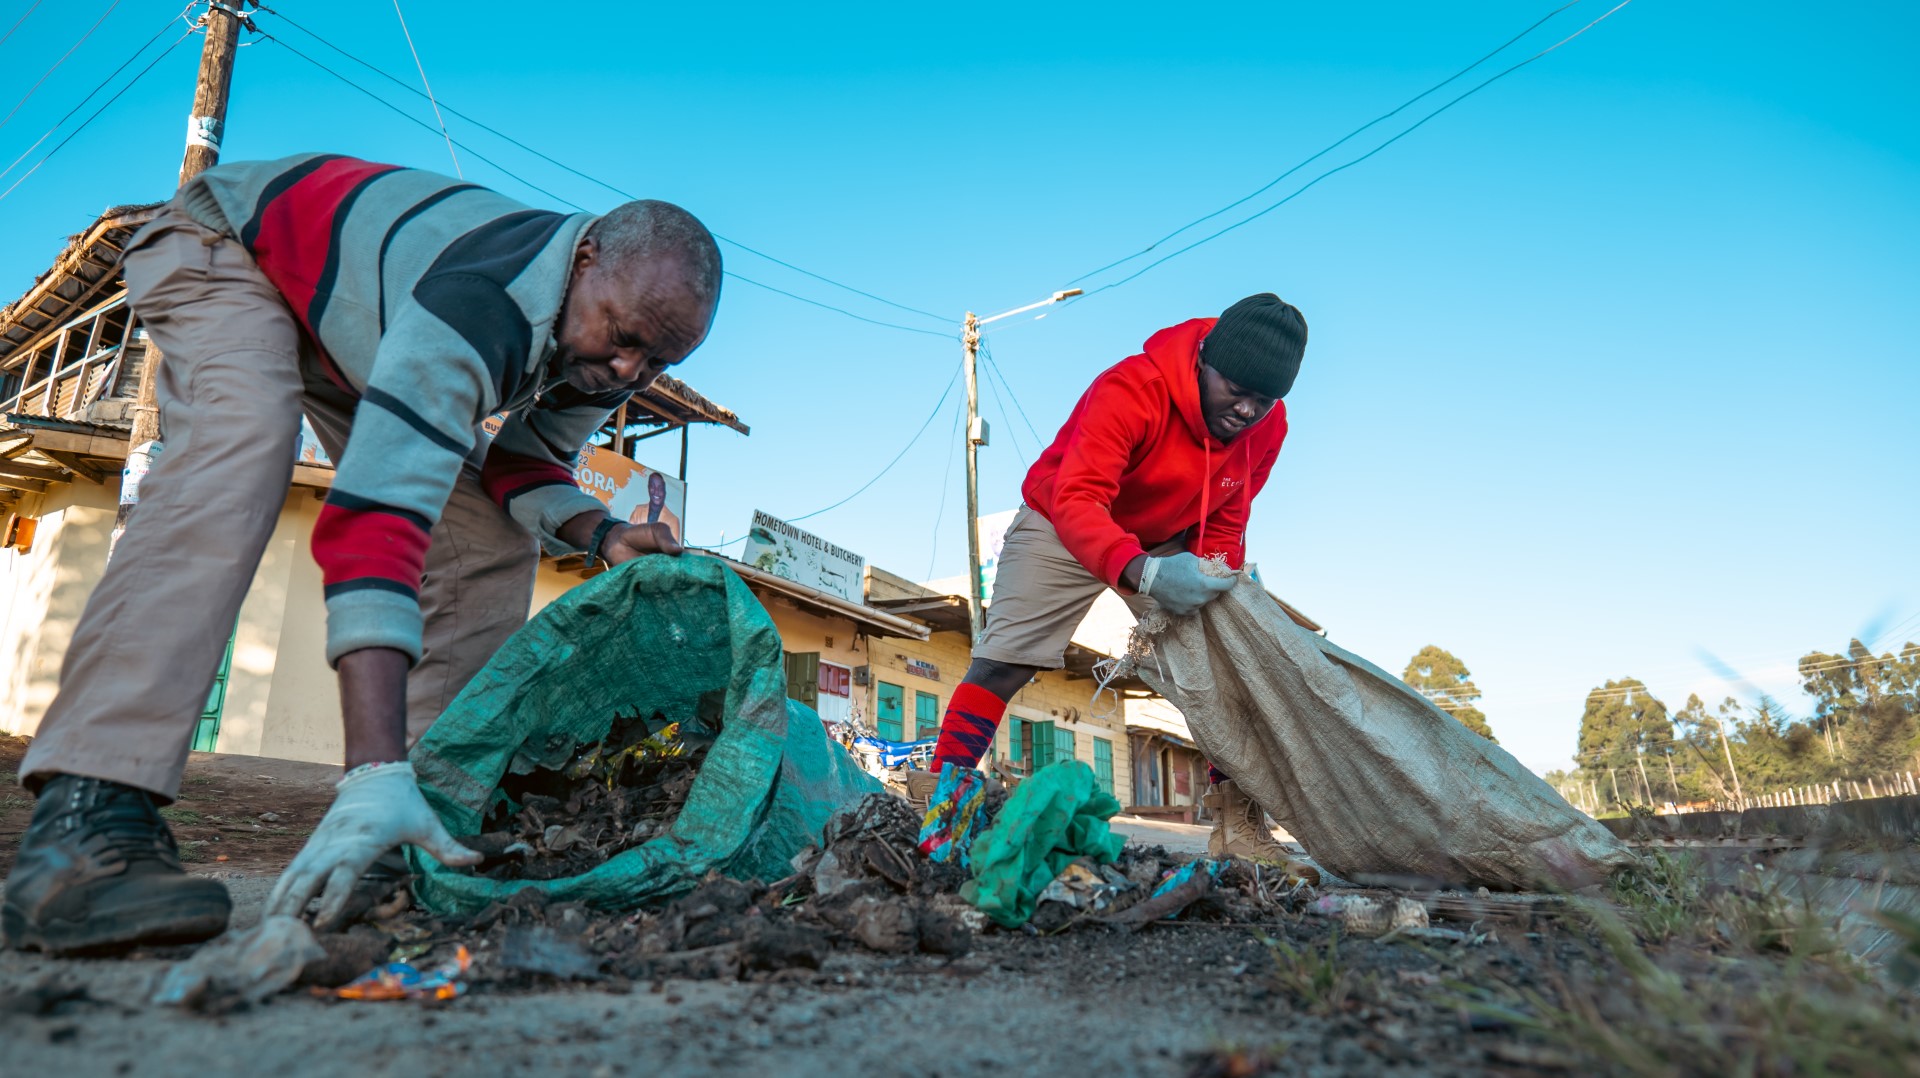 Wes & Musili taking part in World cleanup day 2022